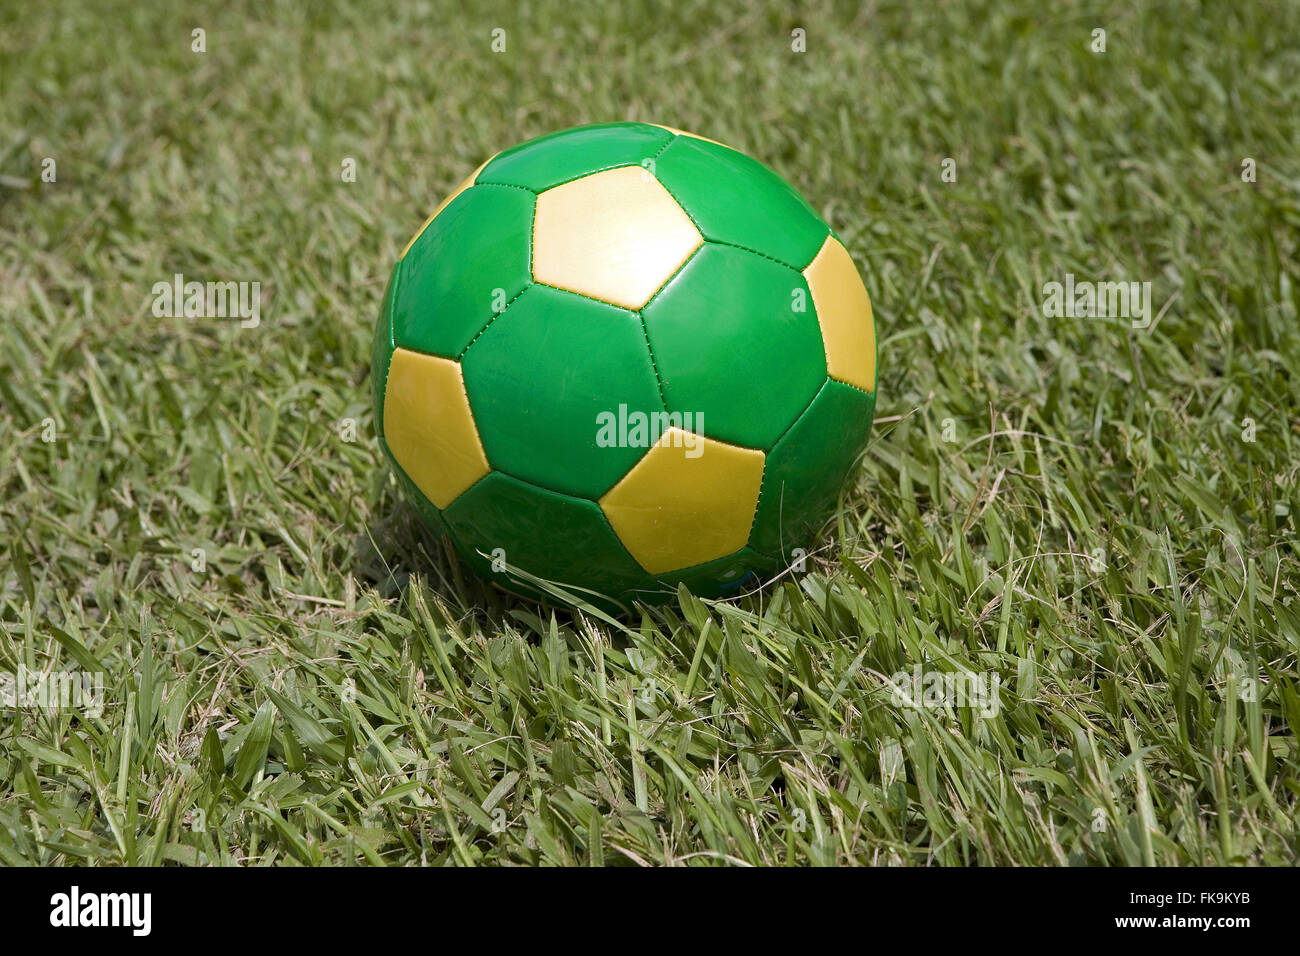 Soccer ball with the flag colors of Brazil Stock Photo